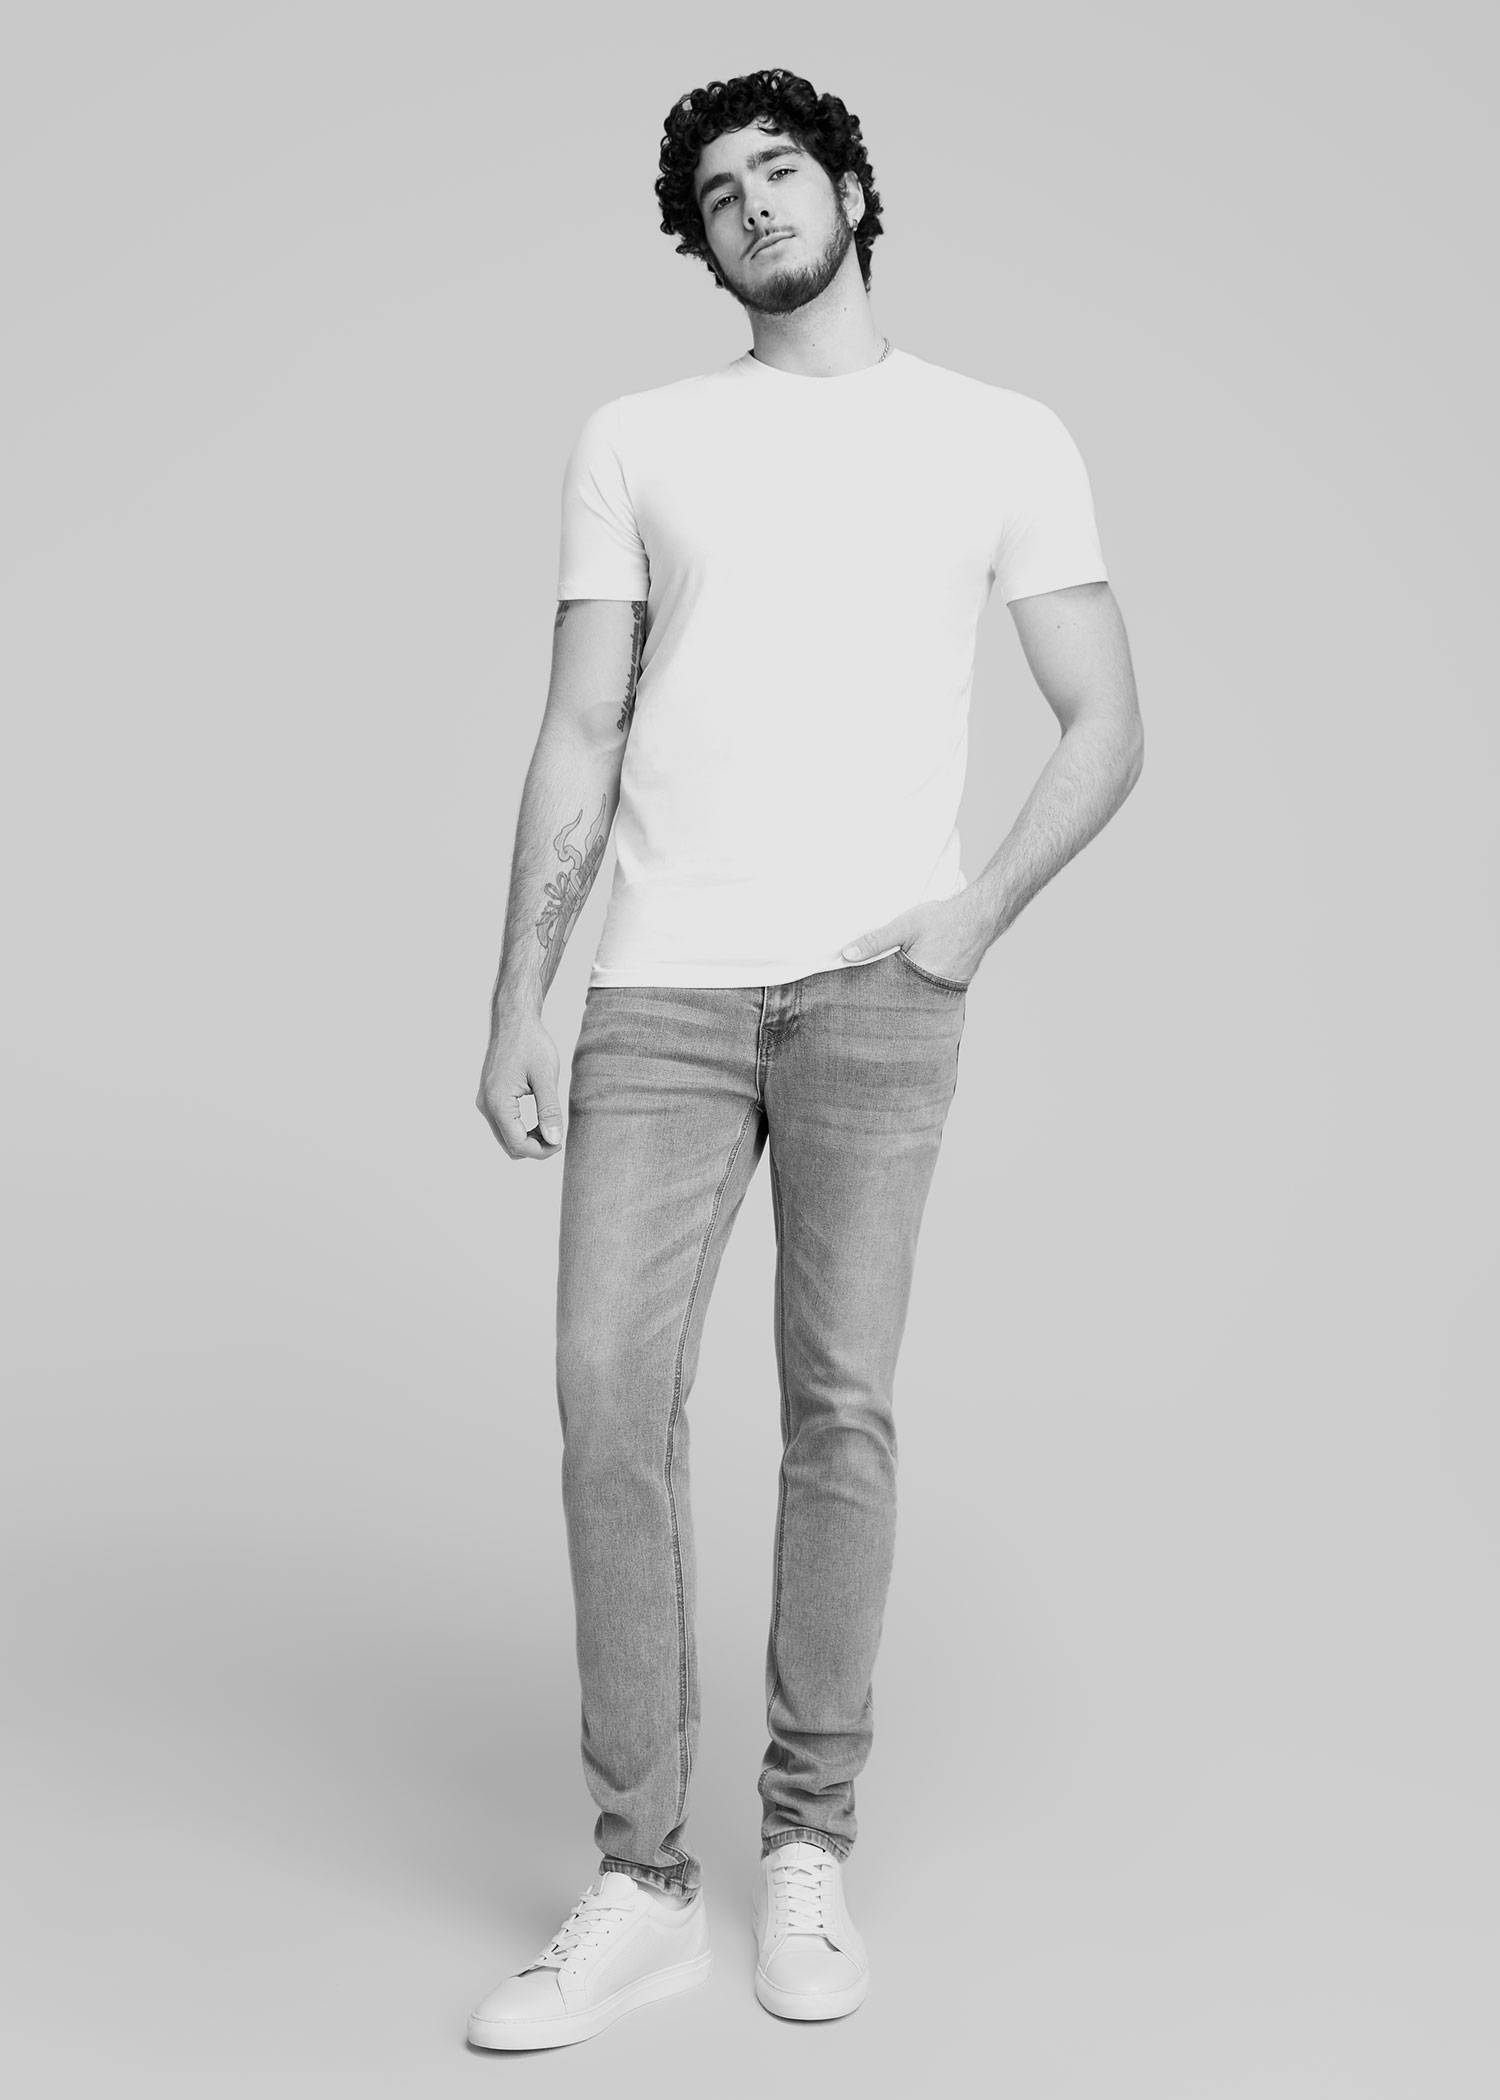 Tall man standing with his hand in his pocket wearing a white tshirt and light jeans